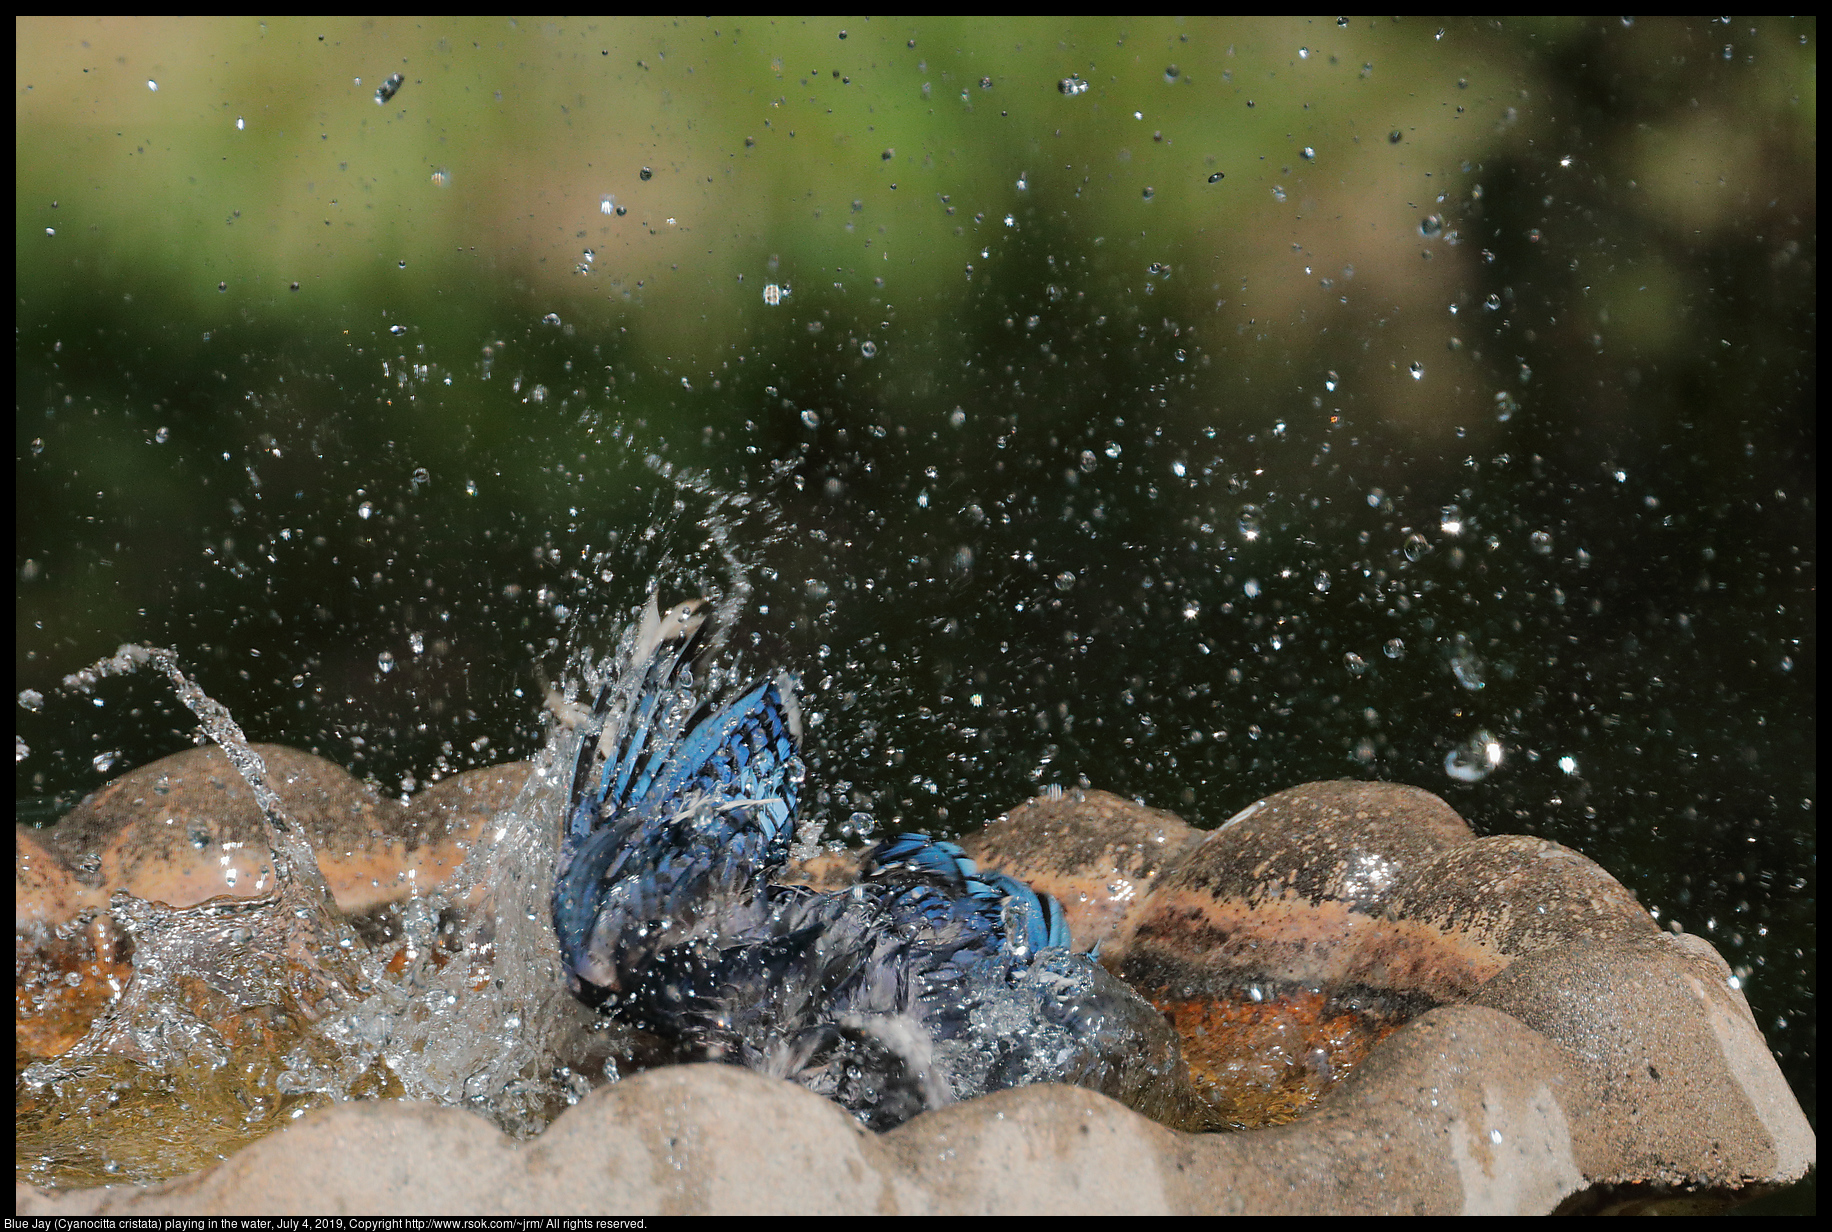 Blue Jay (Cyanocitta cristata) playing in the water, July 4, 2019